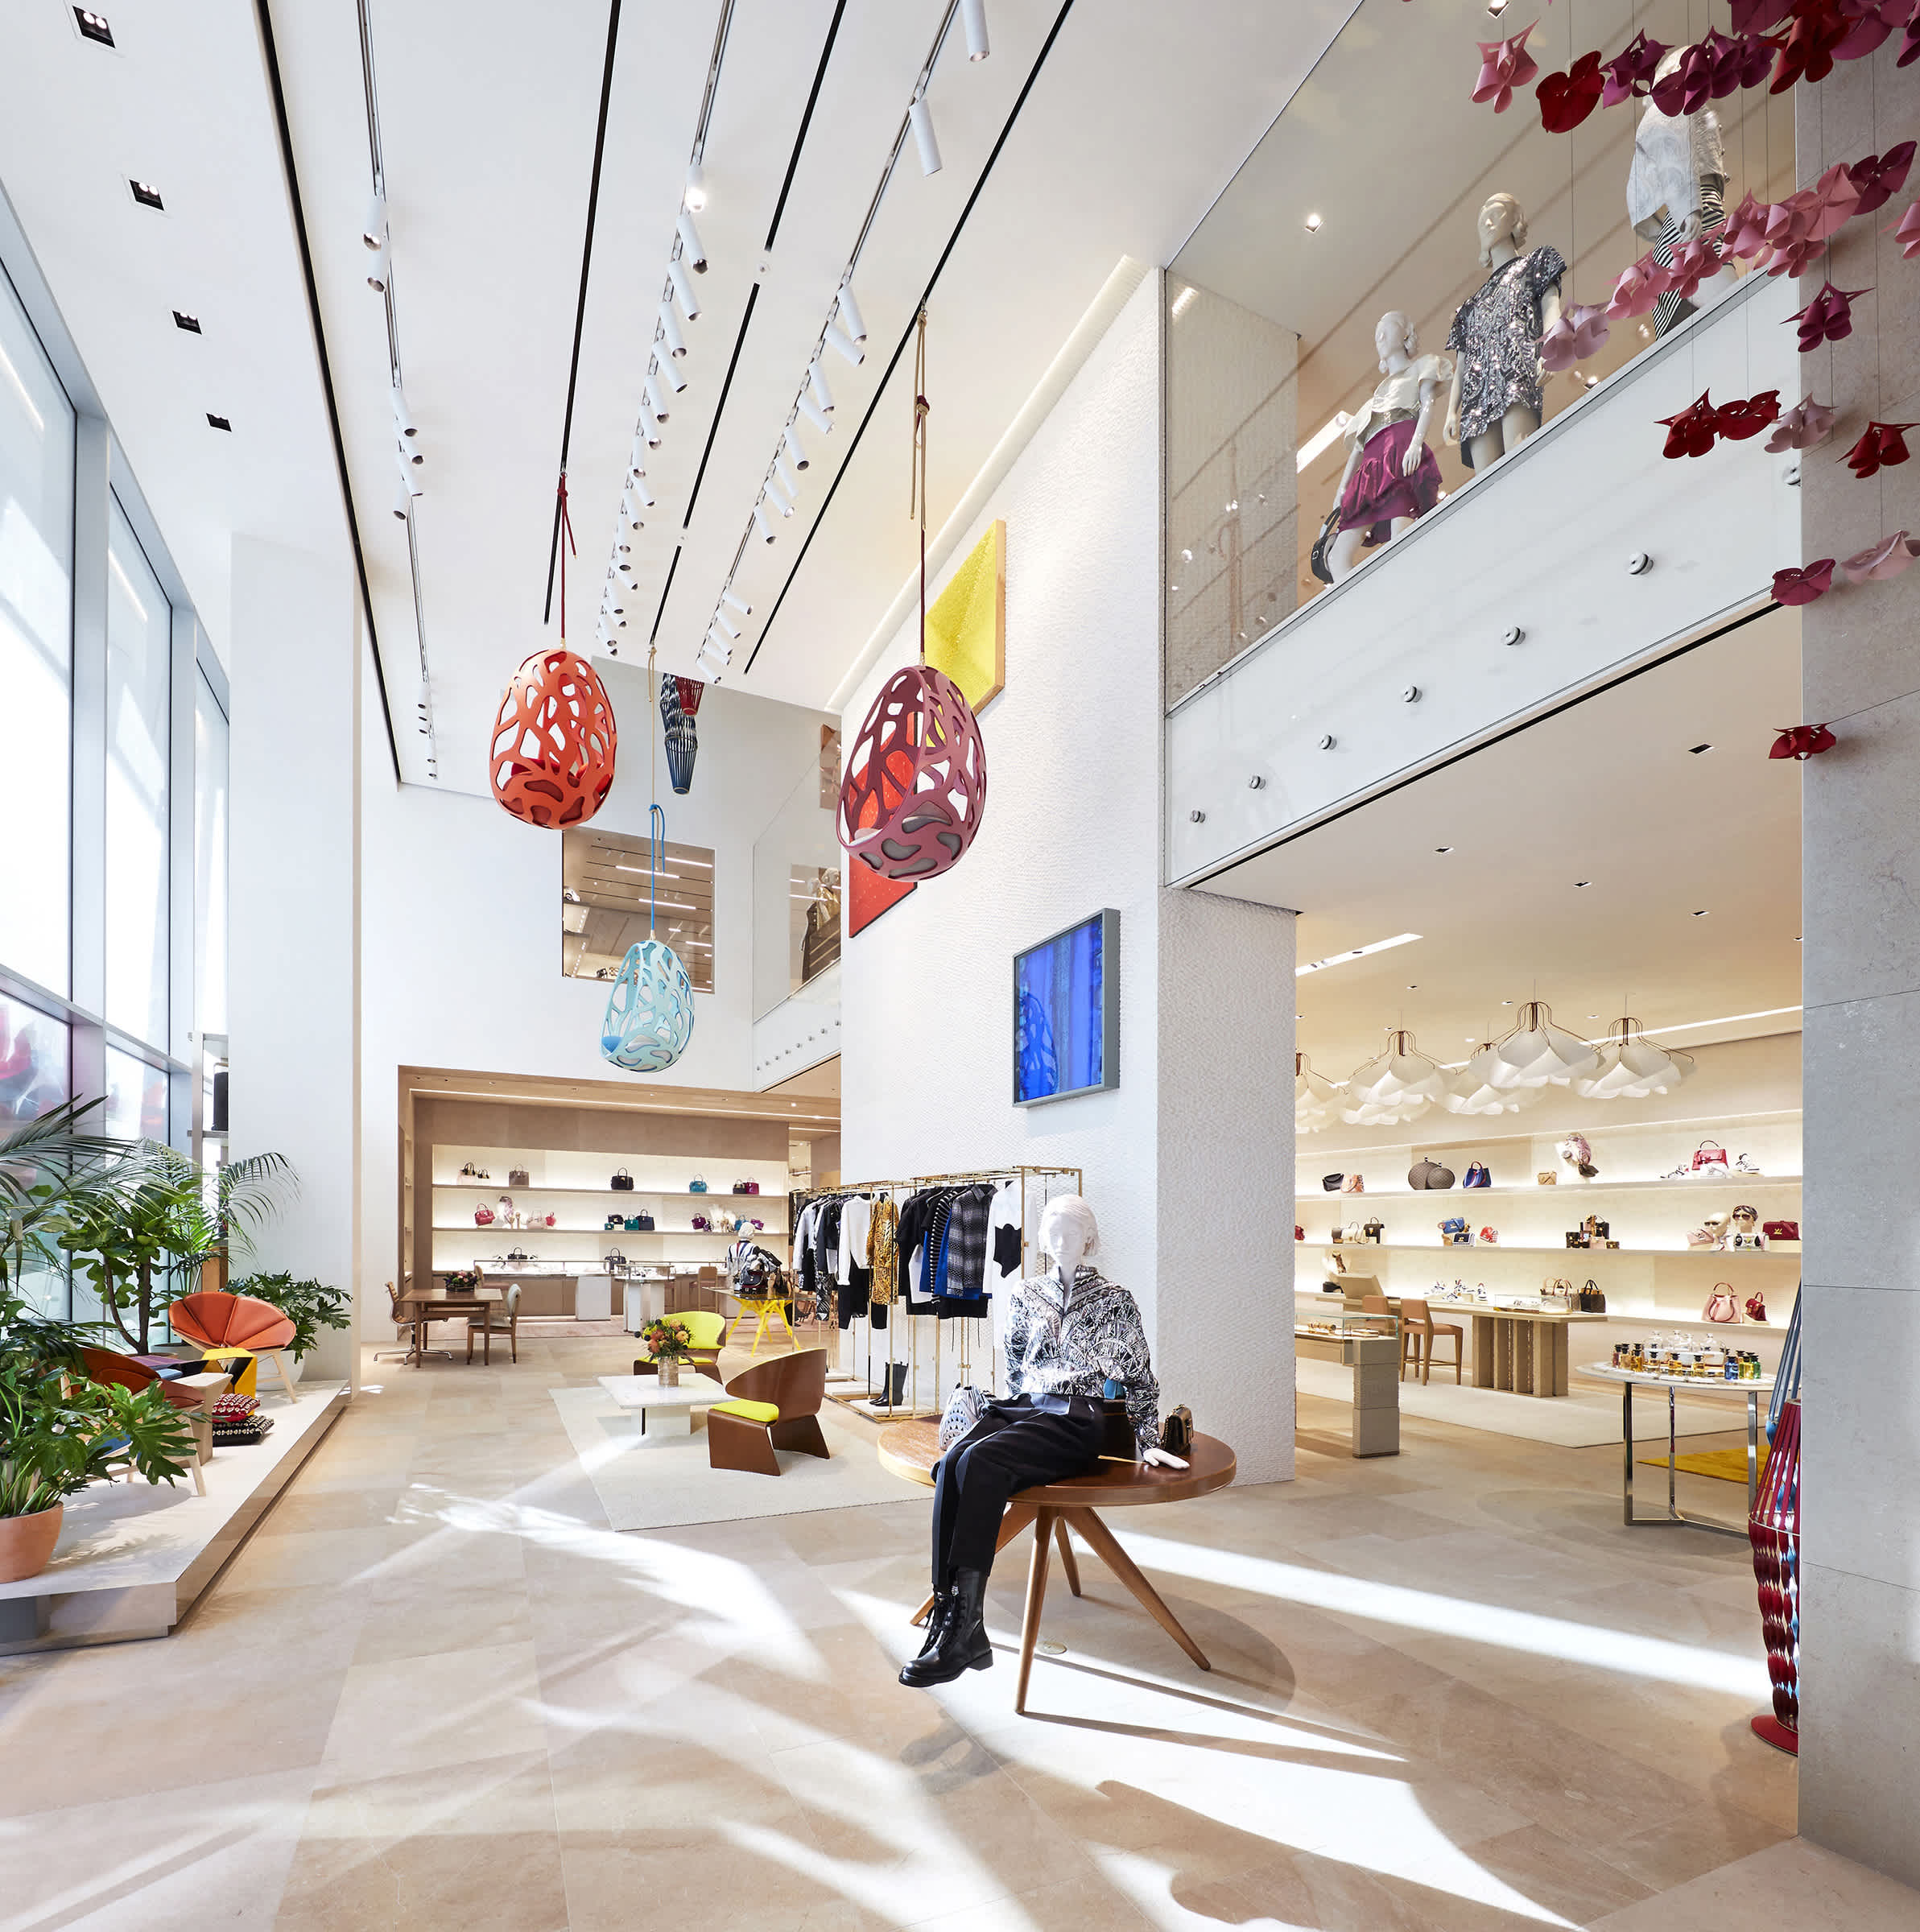 Louis Vuitton's new flagship store opens in Seoul